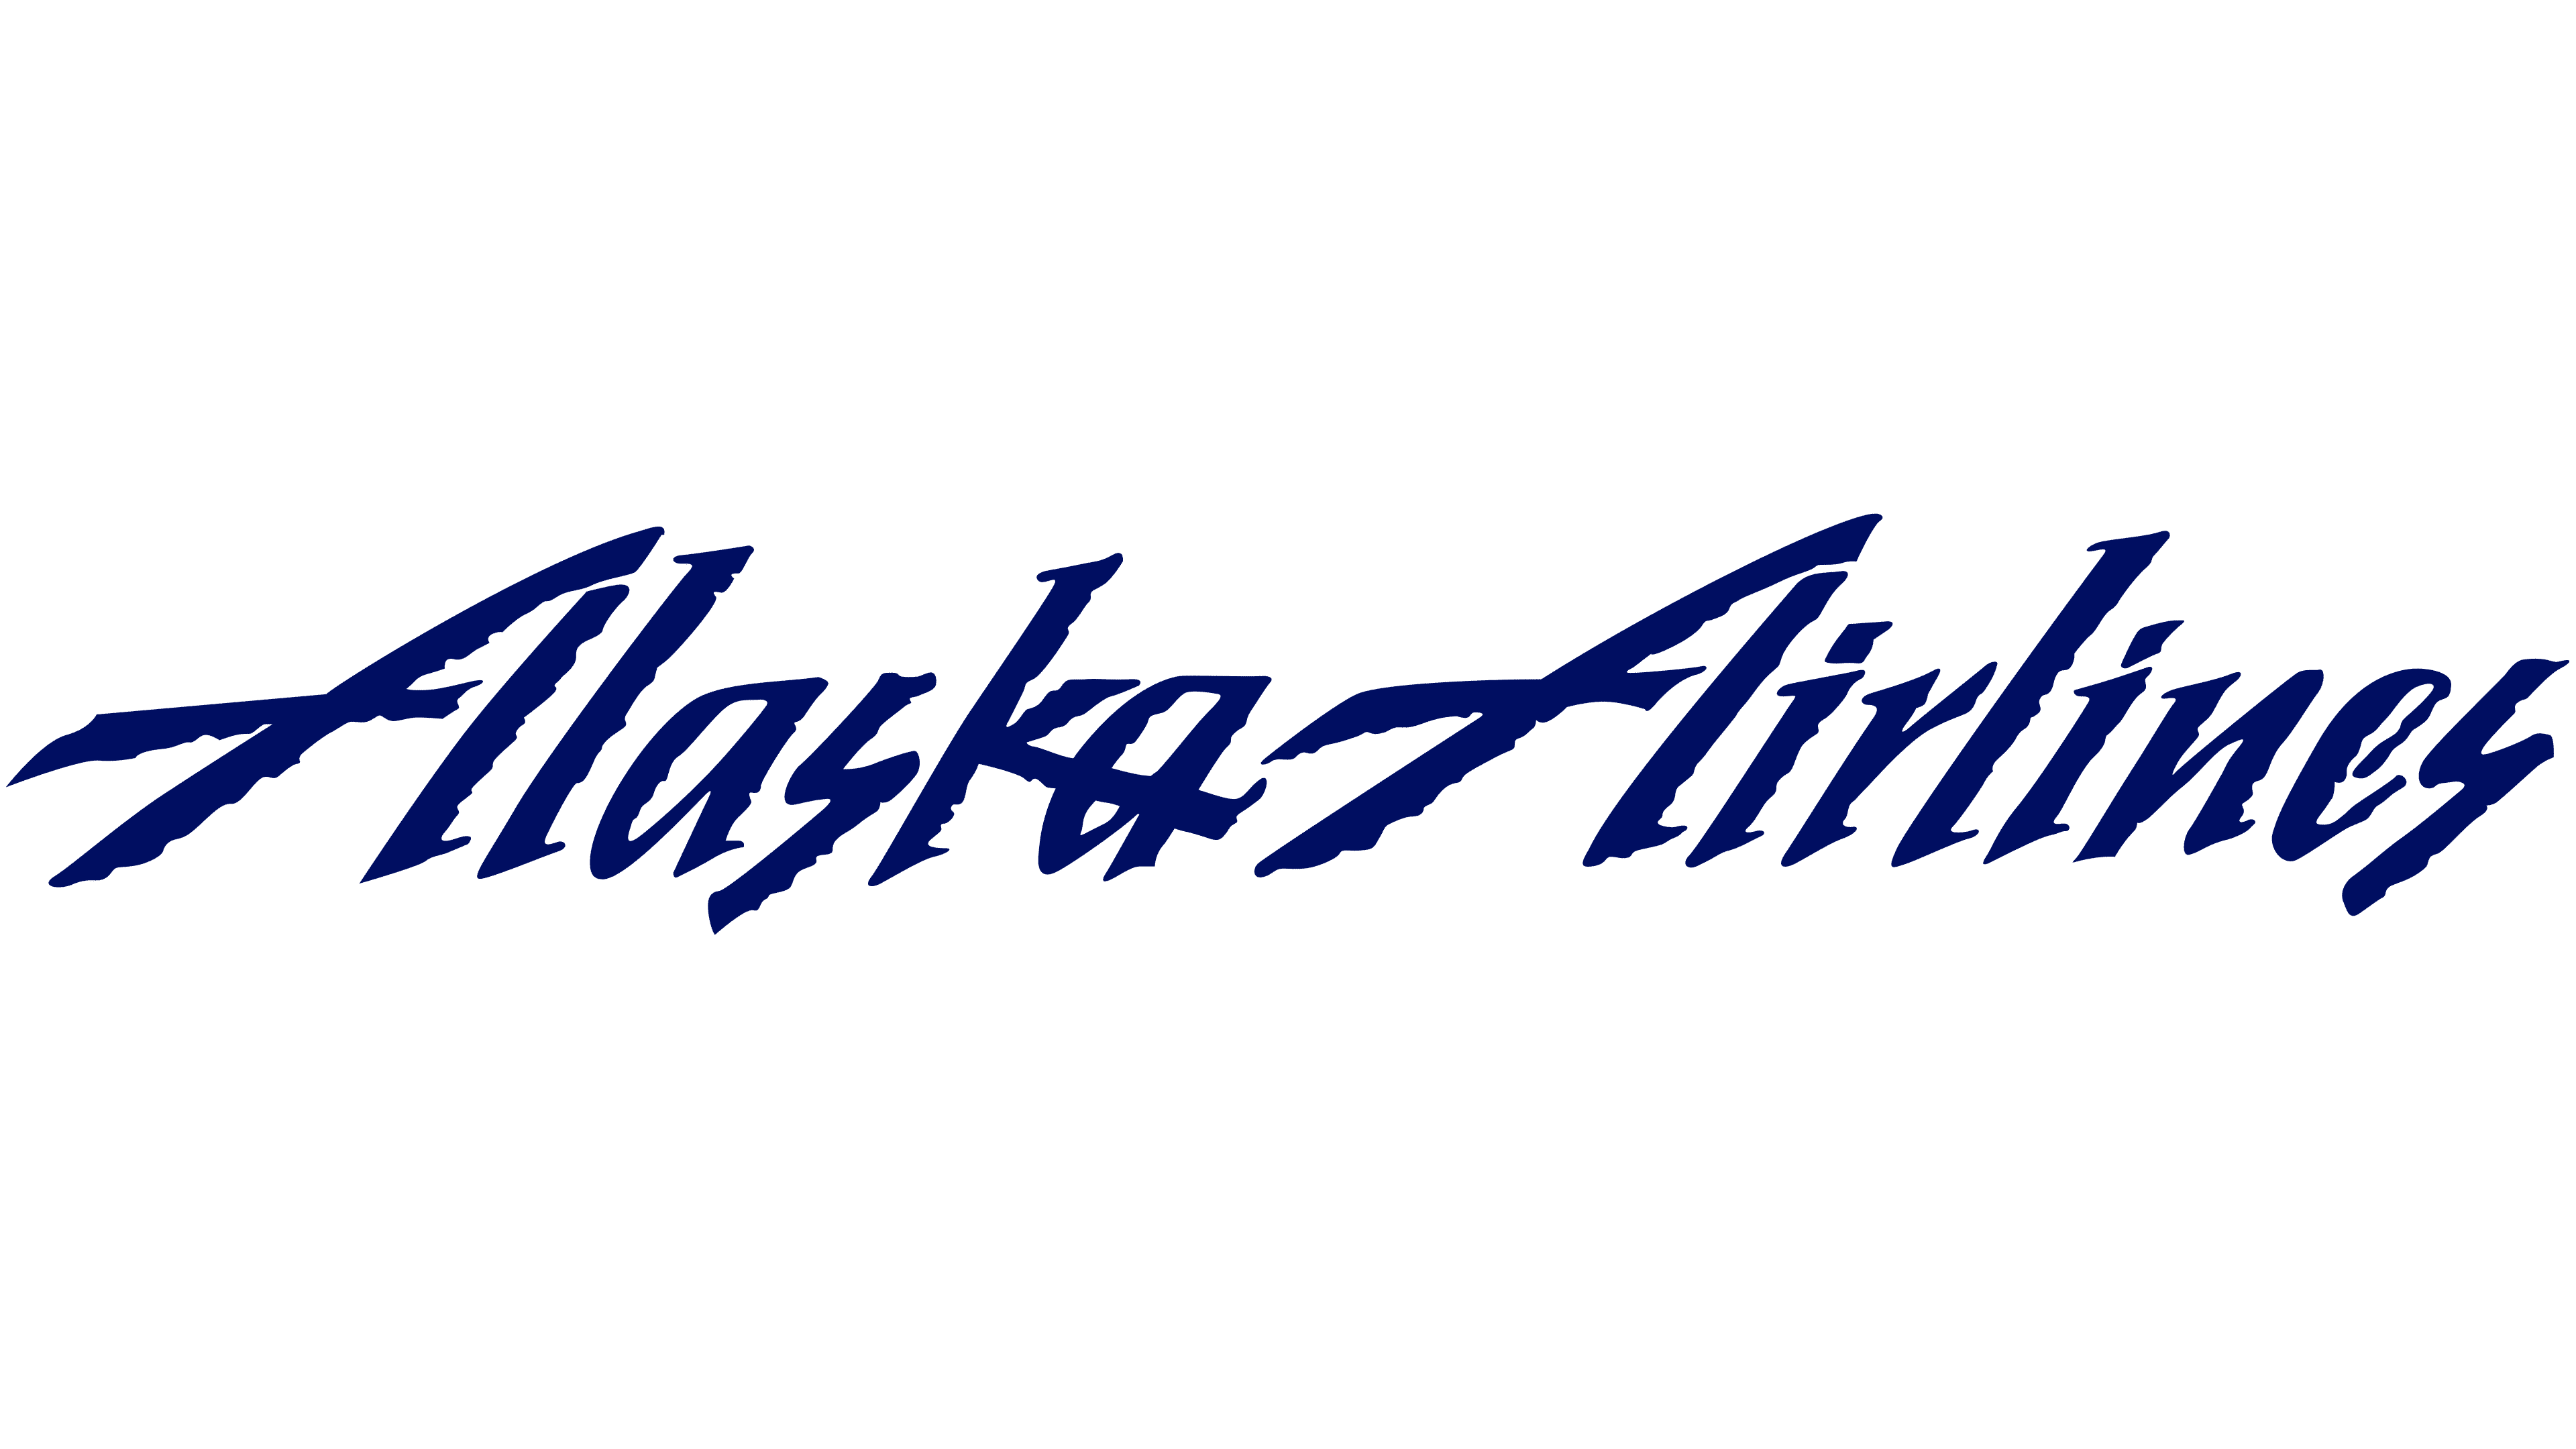 Alaska Airlines Logo Symbol Meaning History Png Brand